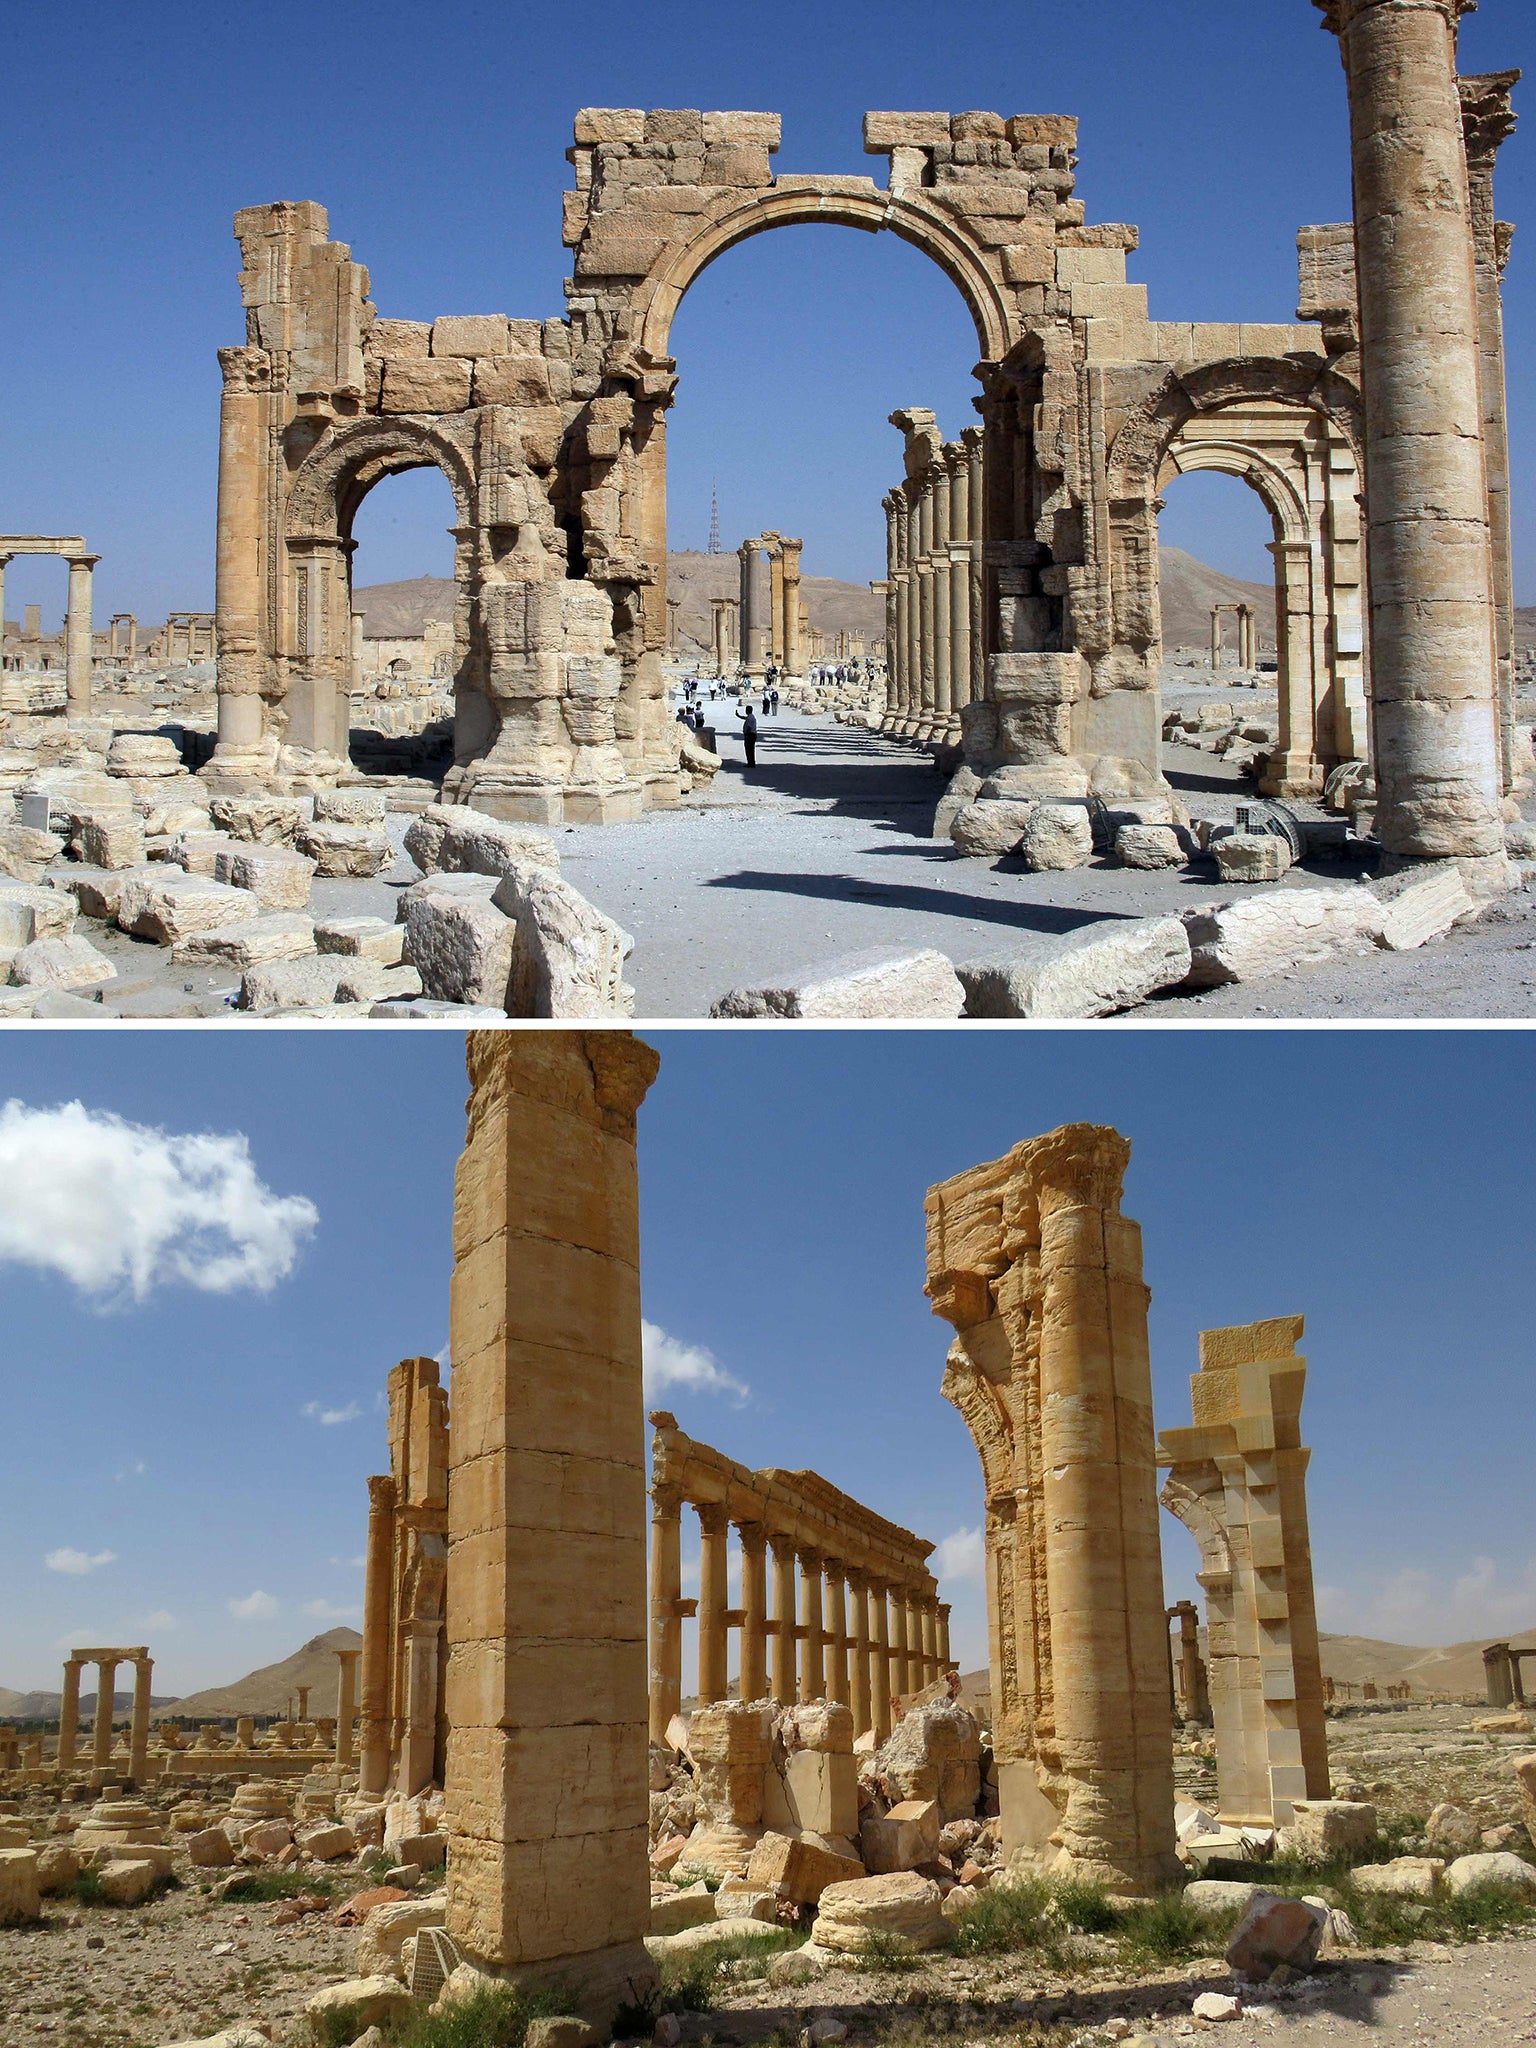 The Arc de Troimphe (Triumph's Arc) prior to being destroyed by Islamic State (IS) group jihadists in October 2015 and the remains of the iconic structure after government troops recaptured the ancient city